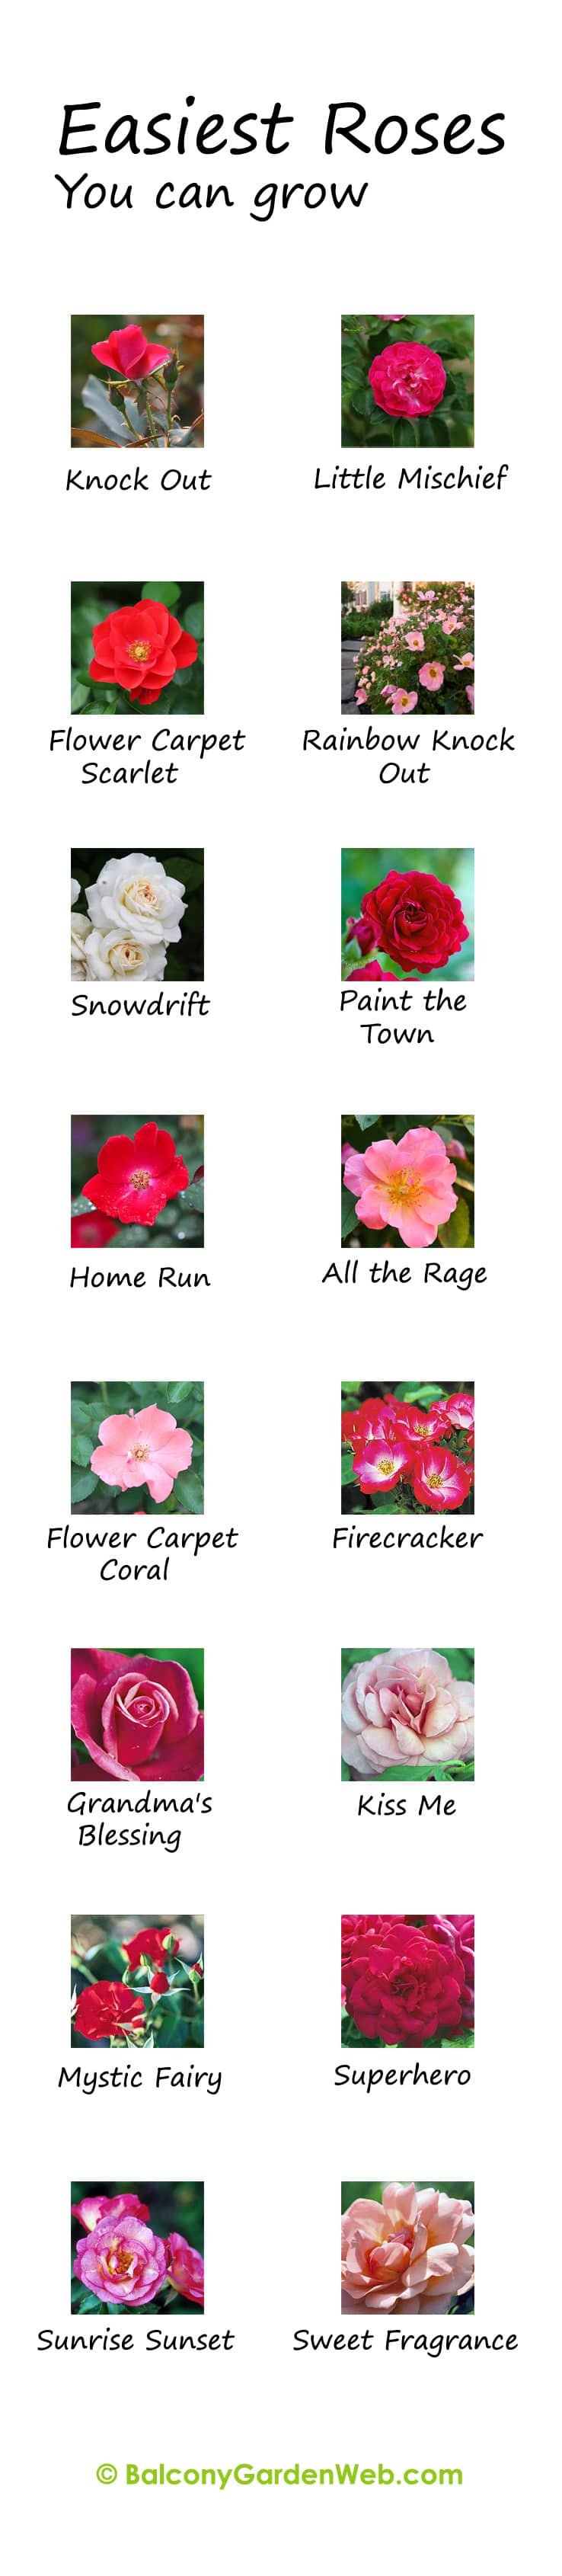 What are the easiest rose varieties? You might have known but the chart given here can be useful for you. More amazing info in this post.